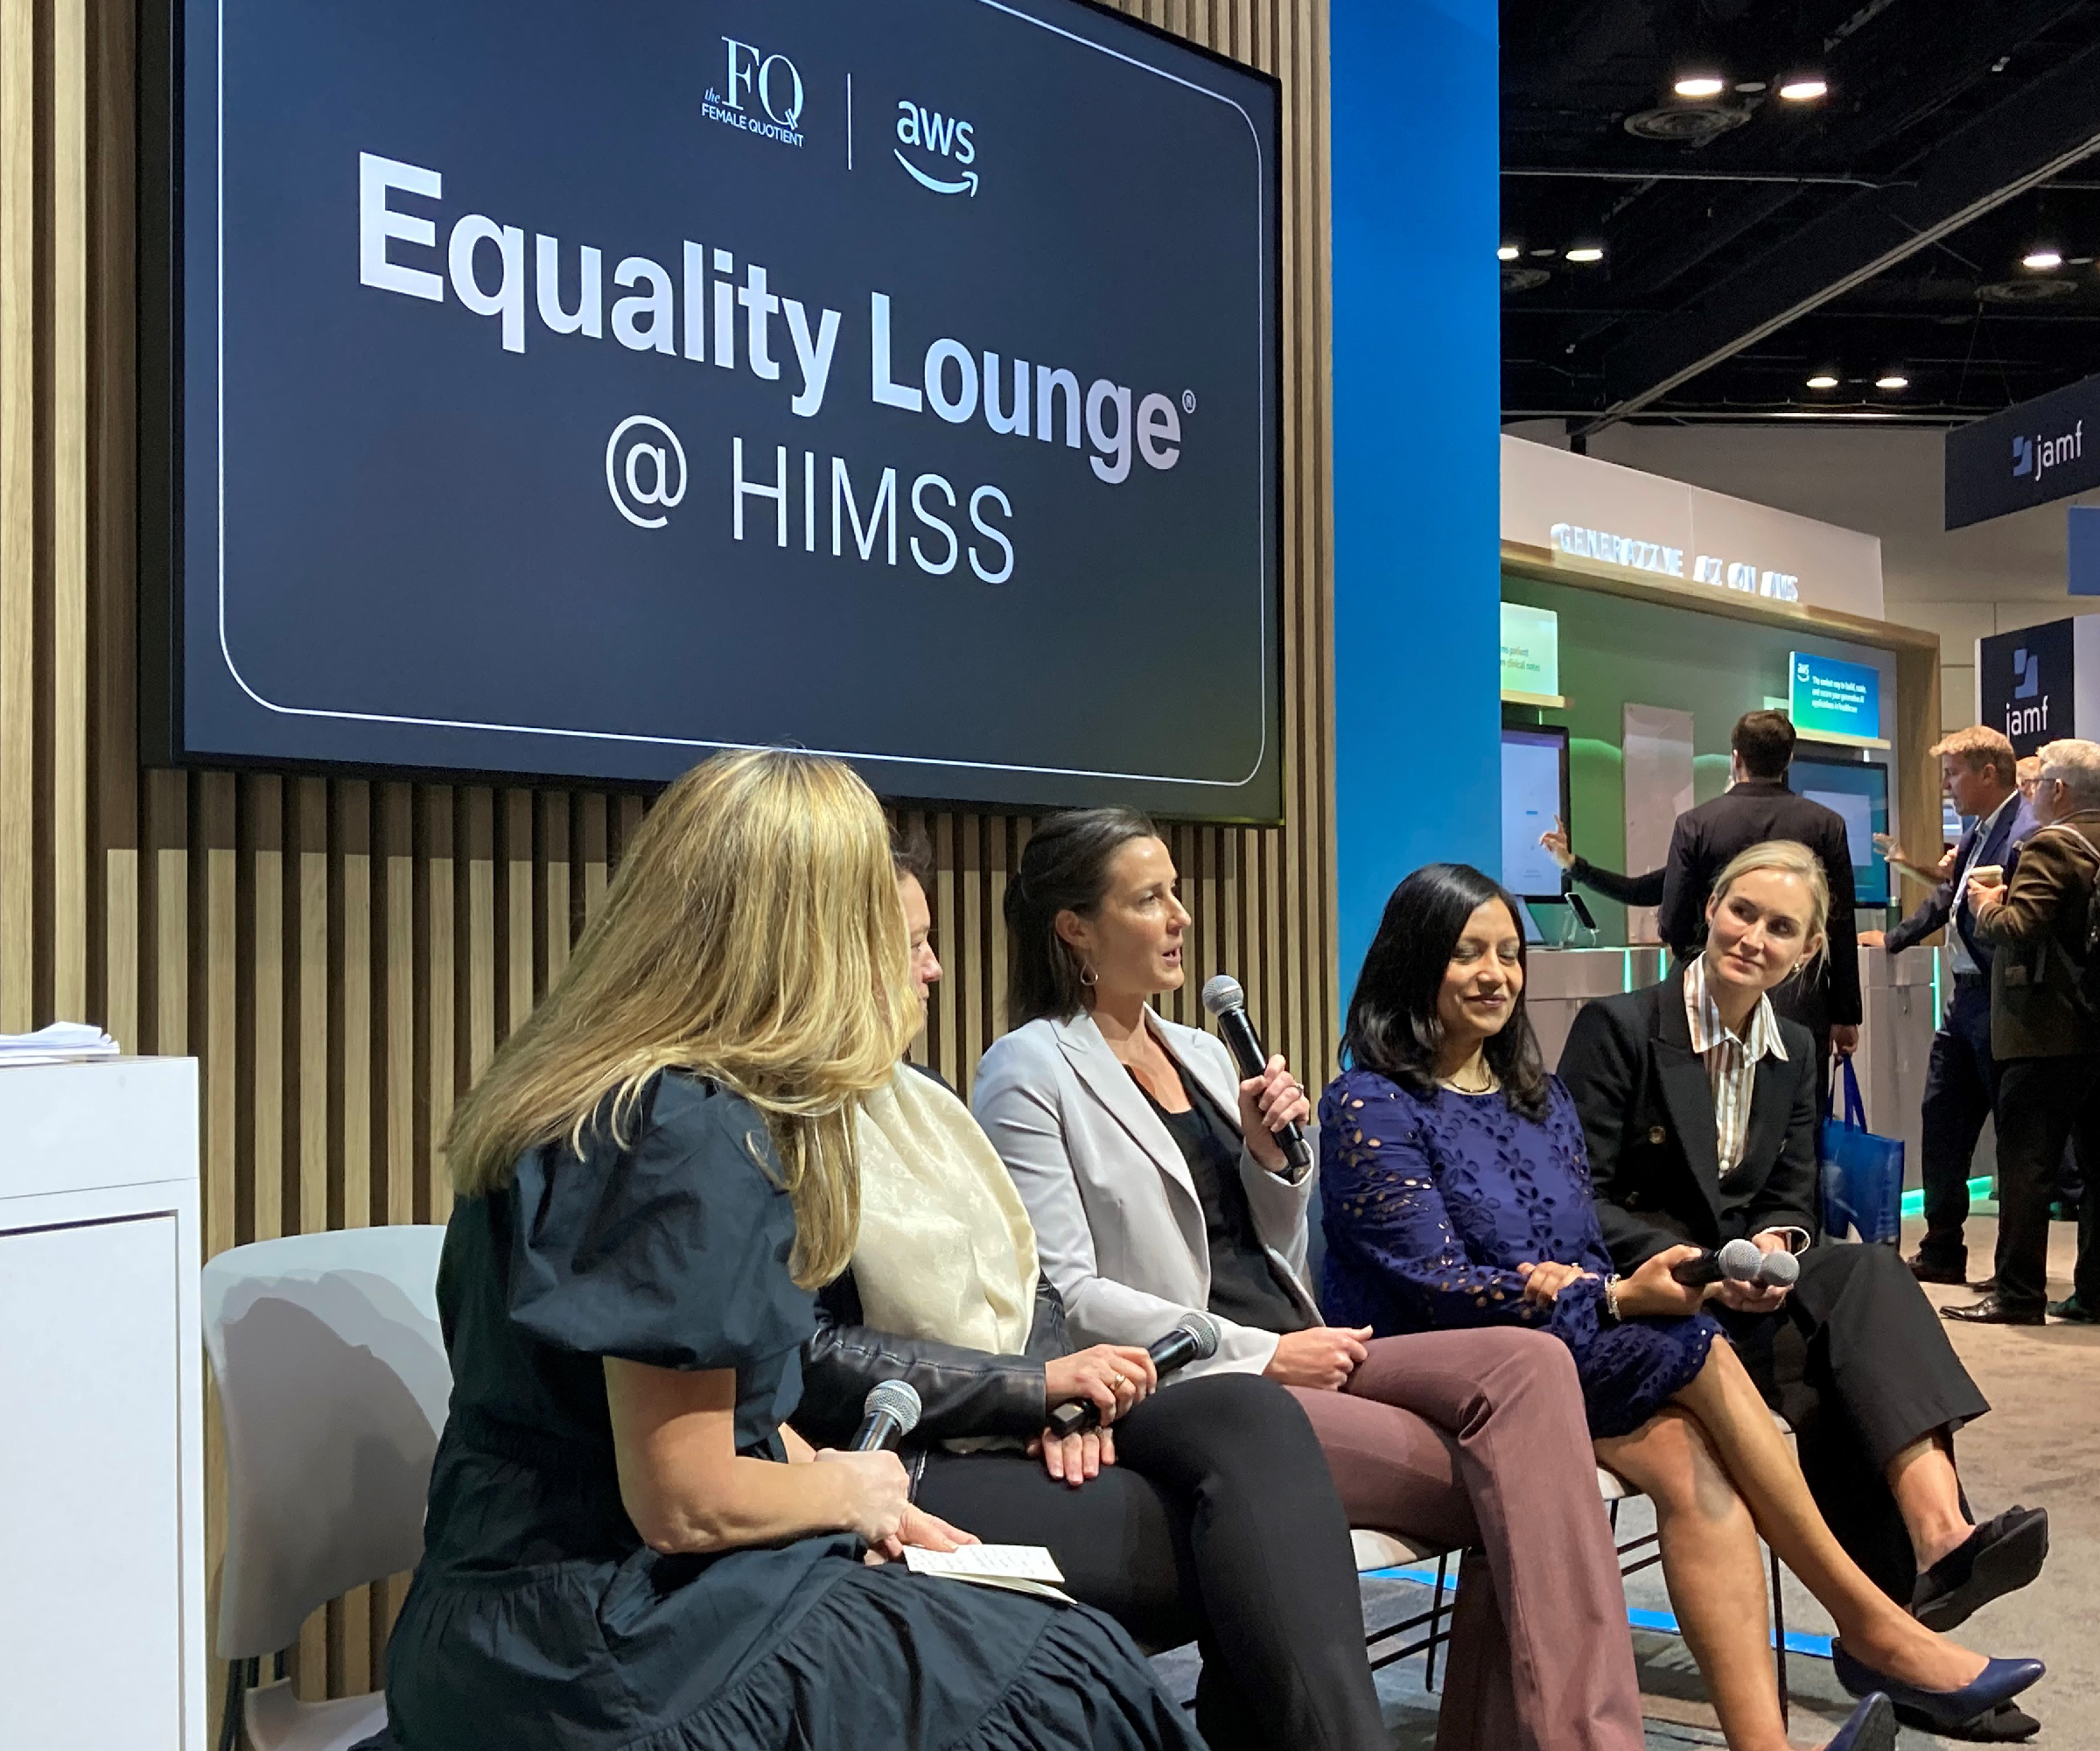 The Equality Lounge at HIMSS.